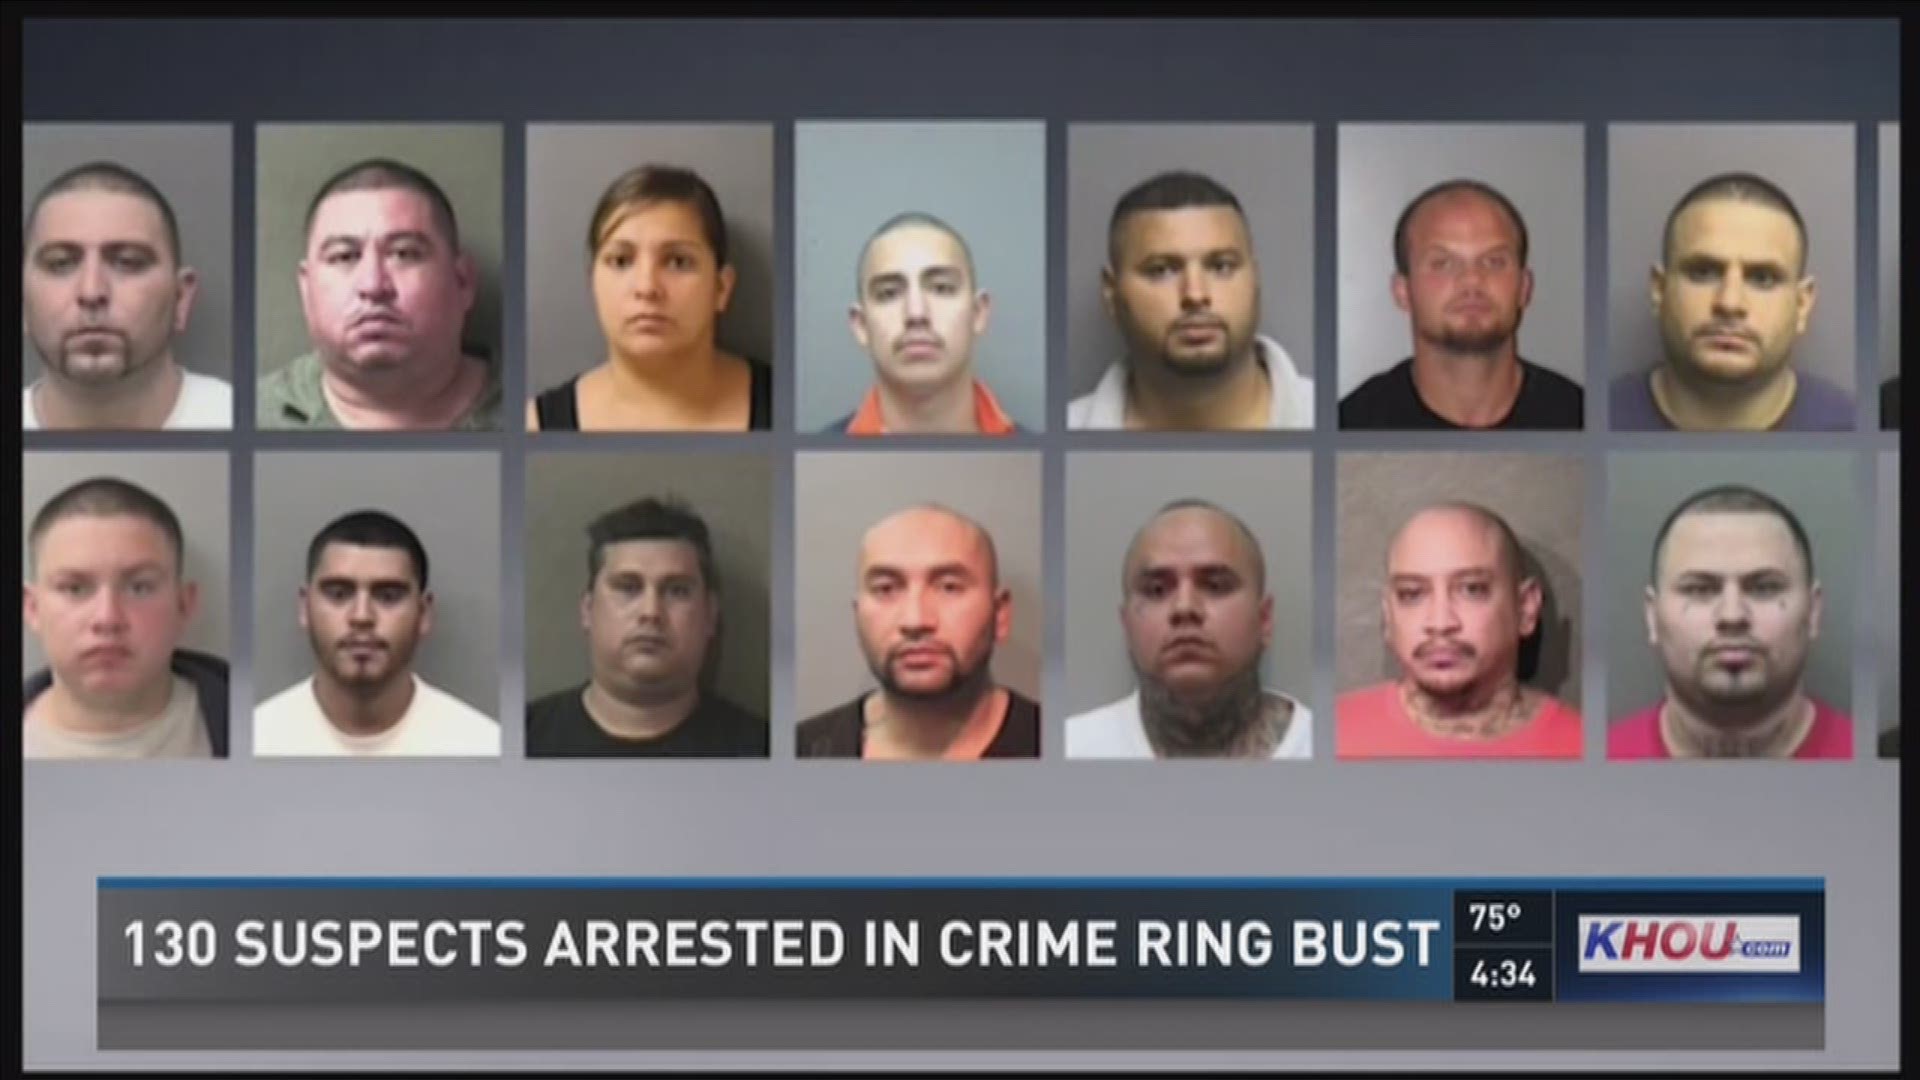 Police have arrested 130 suspects who they say were involved in a major Houston-area crime ring that included millions of dollars worth of items stolen from people's trailers.